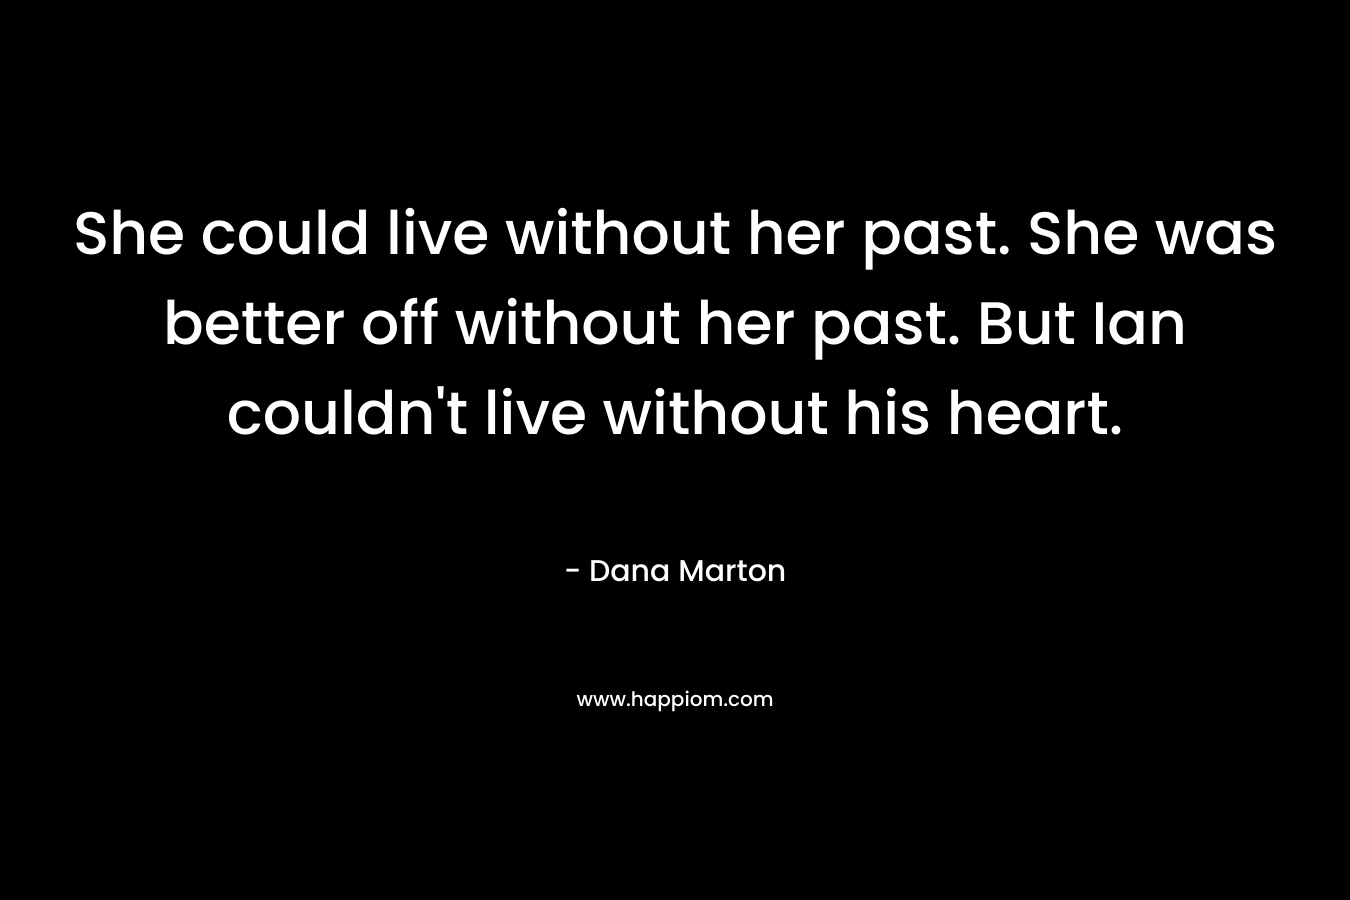 She could live without her past. She was better off without her past. But Ian couldn’t live without his heart. – Dana Marton